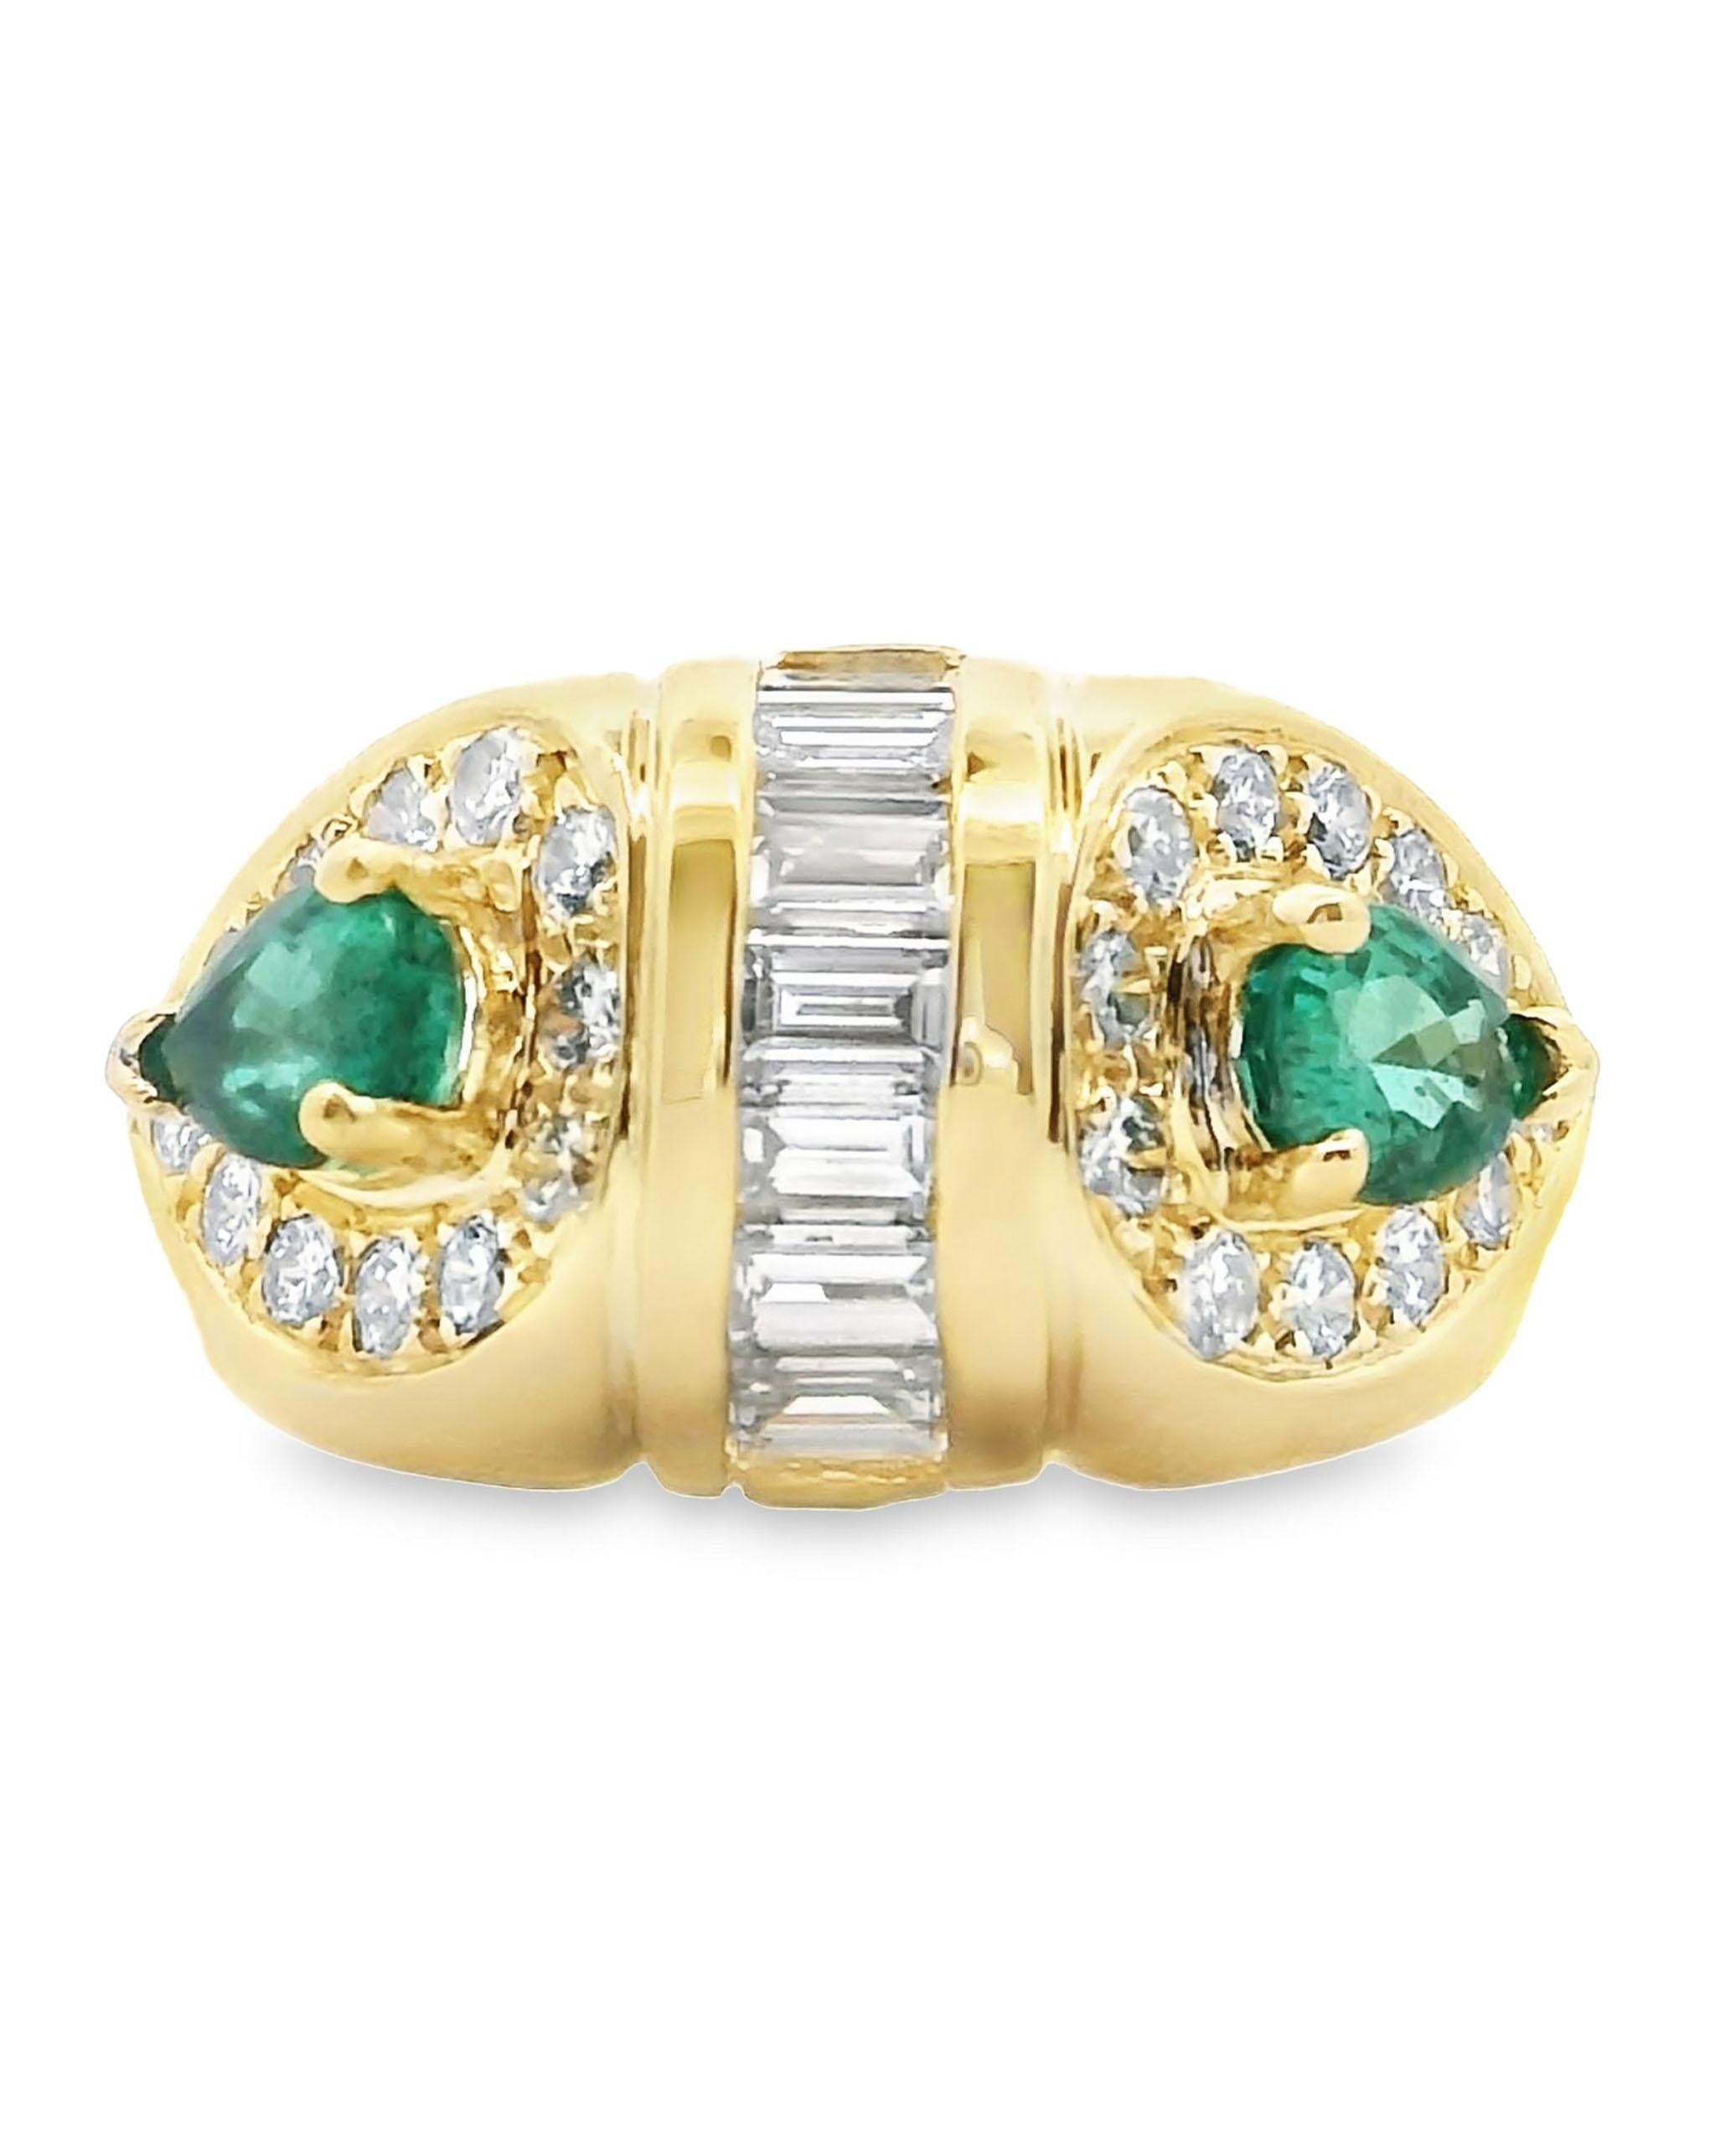 Circa 1985, 18K yellow gold ring with 2 pear shaped emeralds weighing 0.80 carats total, 7 baguette diamonds weighing 0.70 carats total, and 24 round brilliant-cut diamonds weighing 0.50 carats total. 

- Finger size 6
- Item is vintage but not